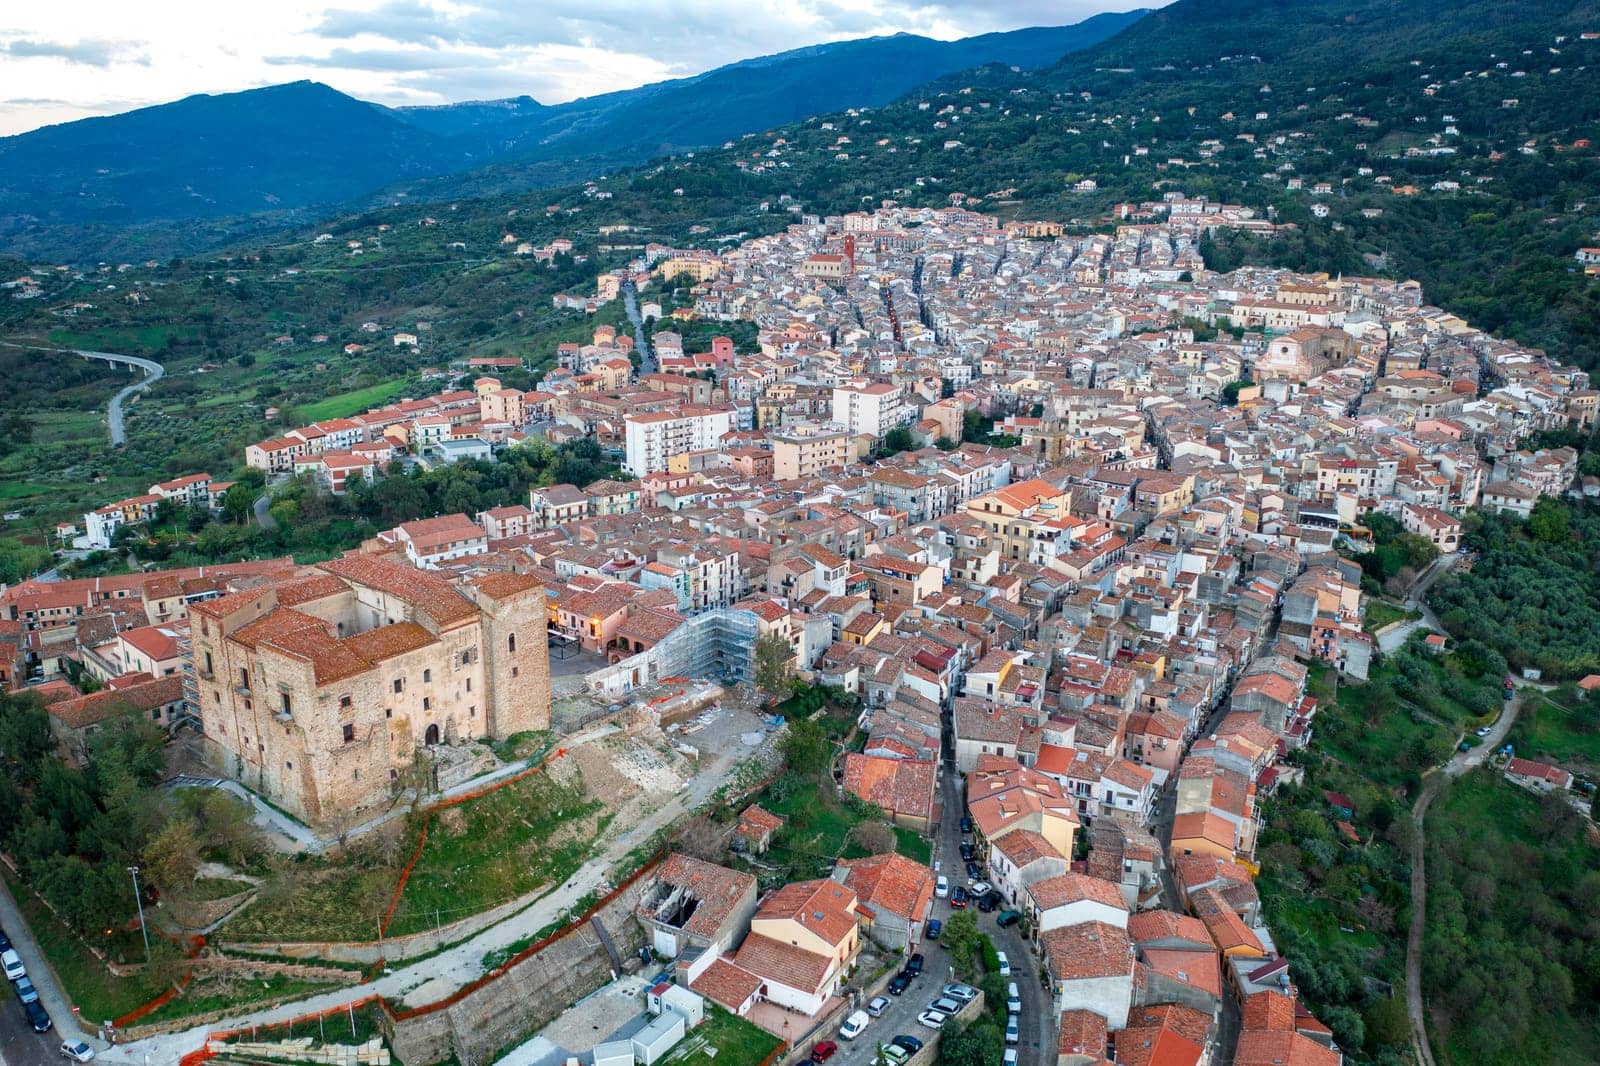 Aerial view of town and castle, Castelbuono, Sicily, Italy by EdVal